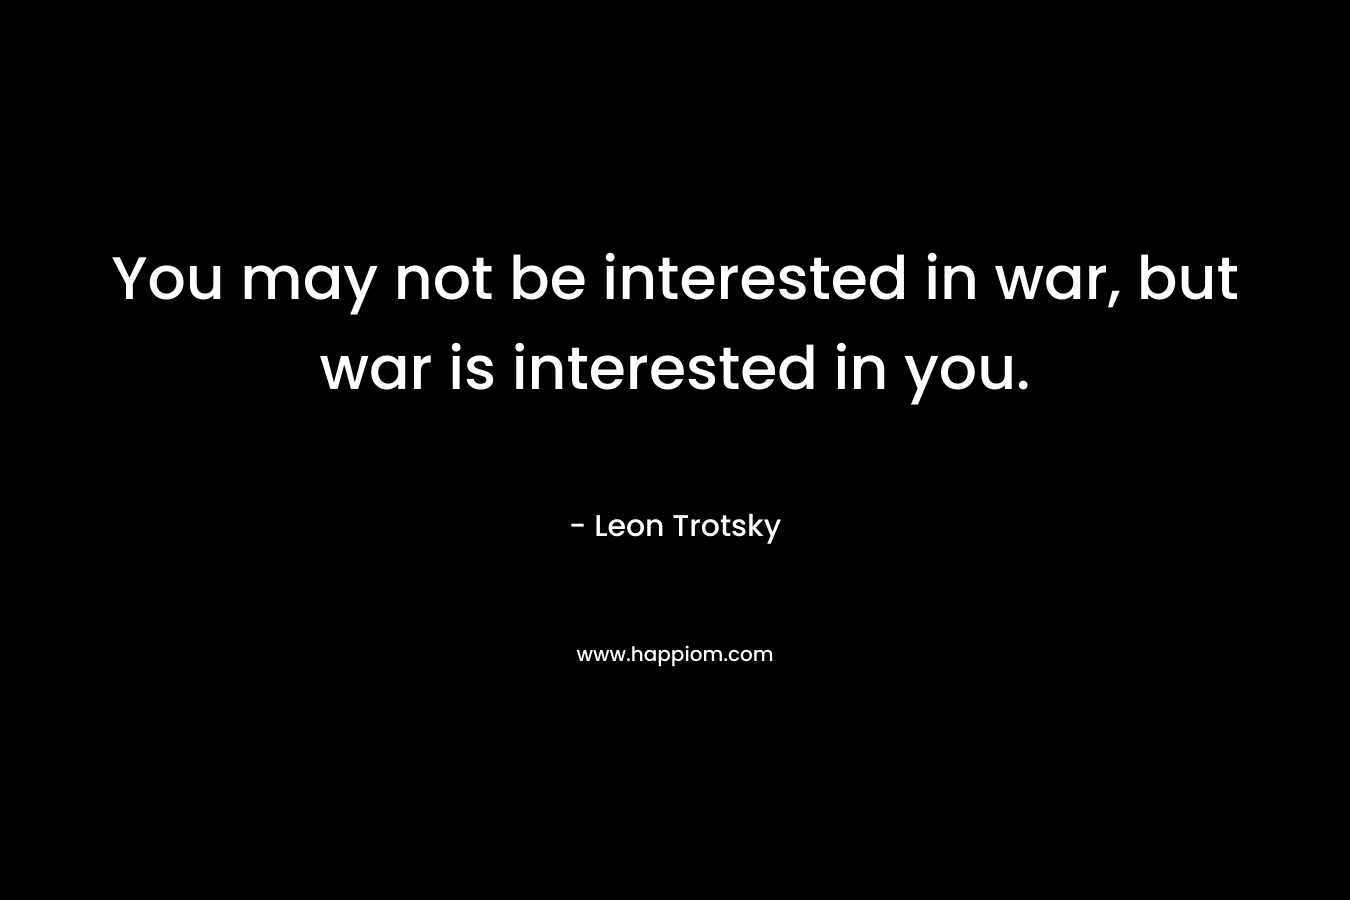 You may not be interested in war, but war is interested in you.